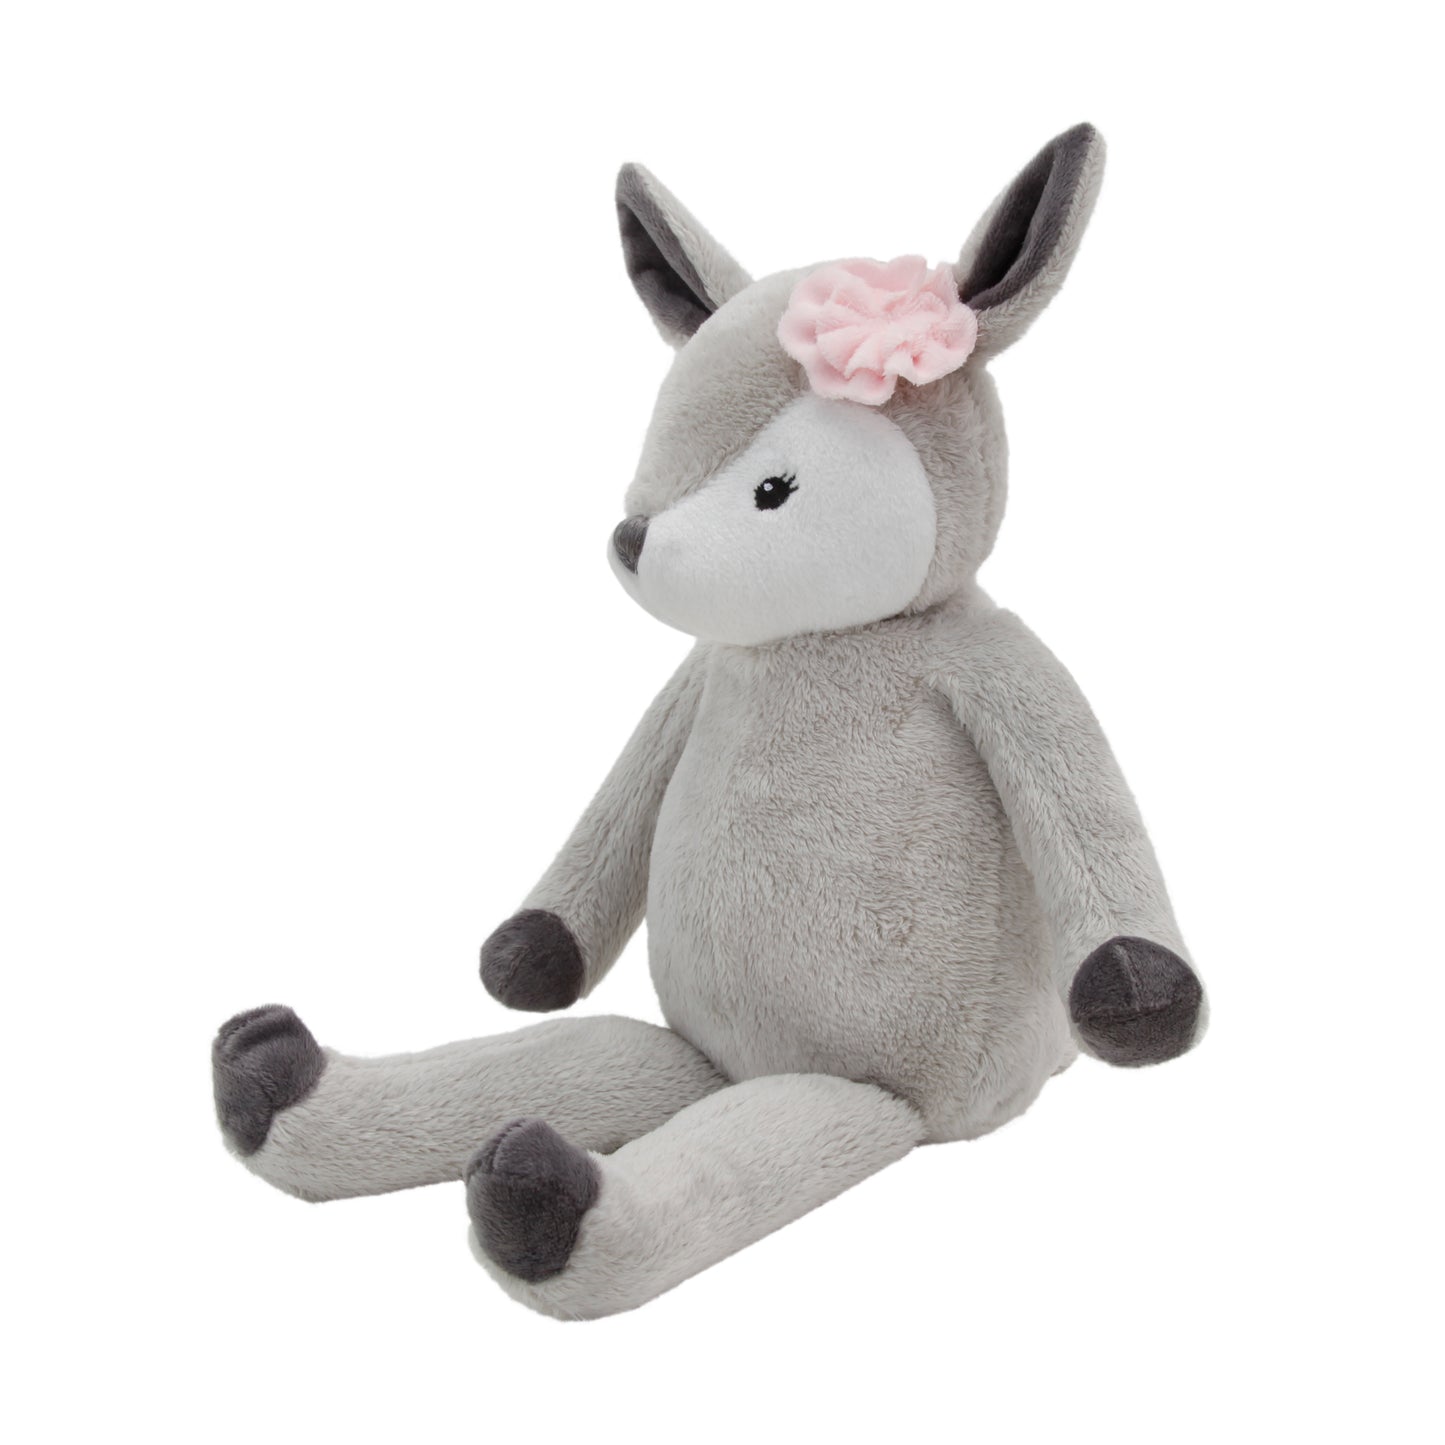 Little Love by NoJo Lucy the Grey and White Plush Deer with Pink Rose